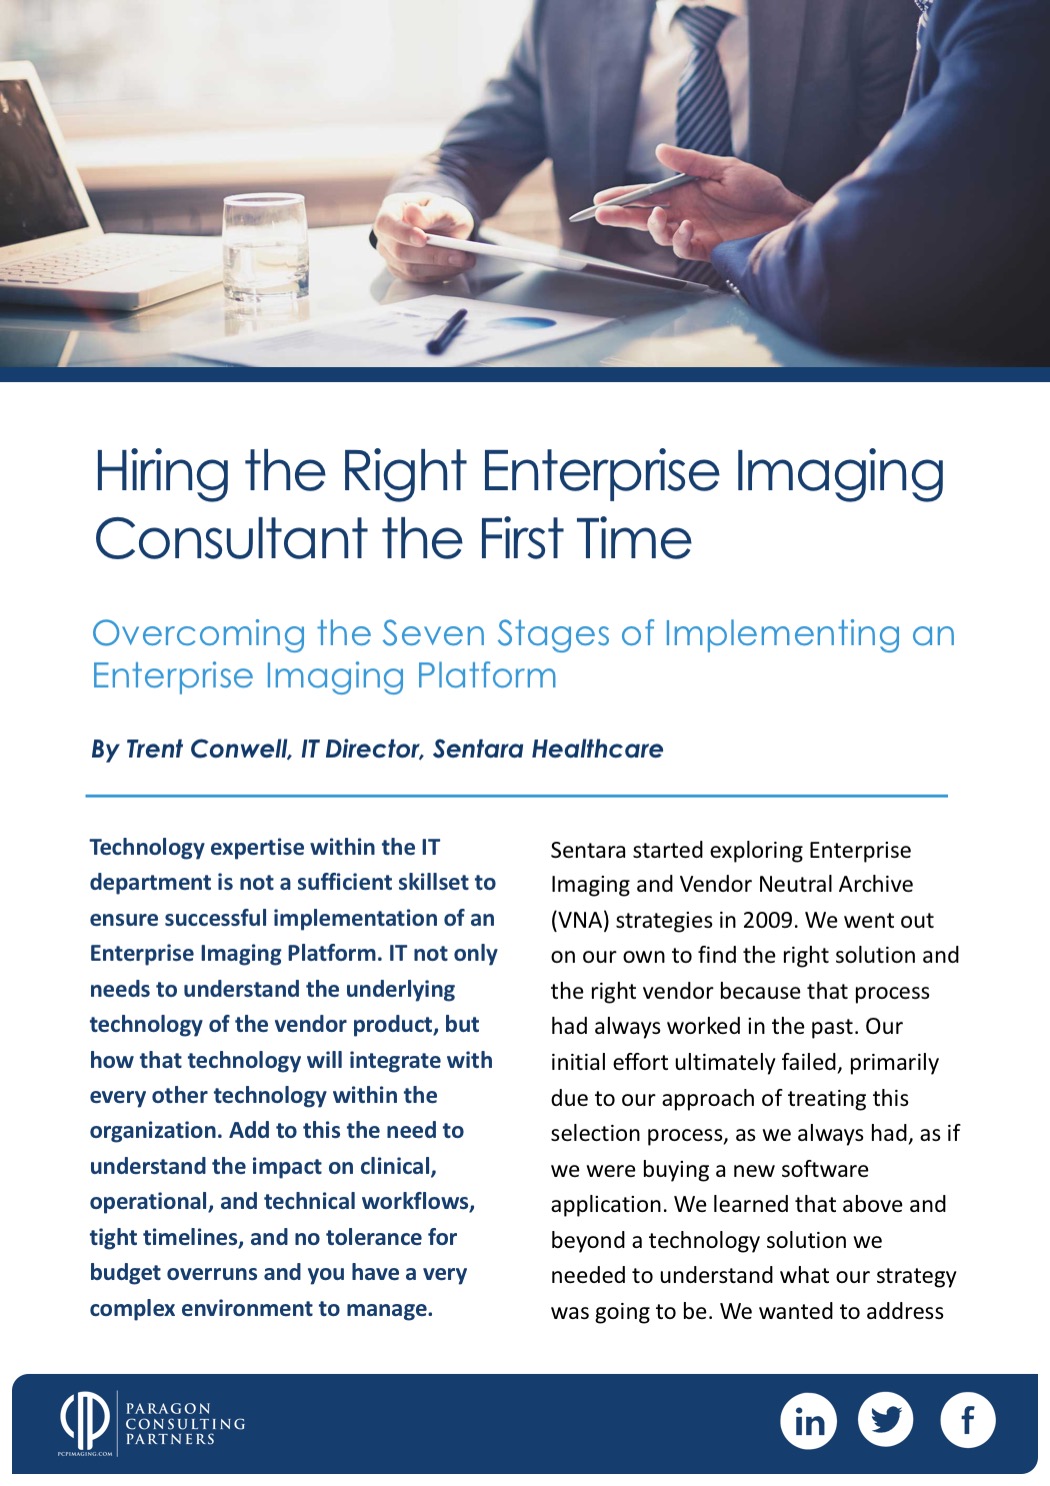 Hiring the Right Enterprise Imaging Consultant the First Time